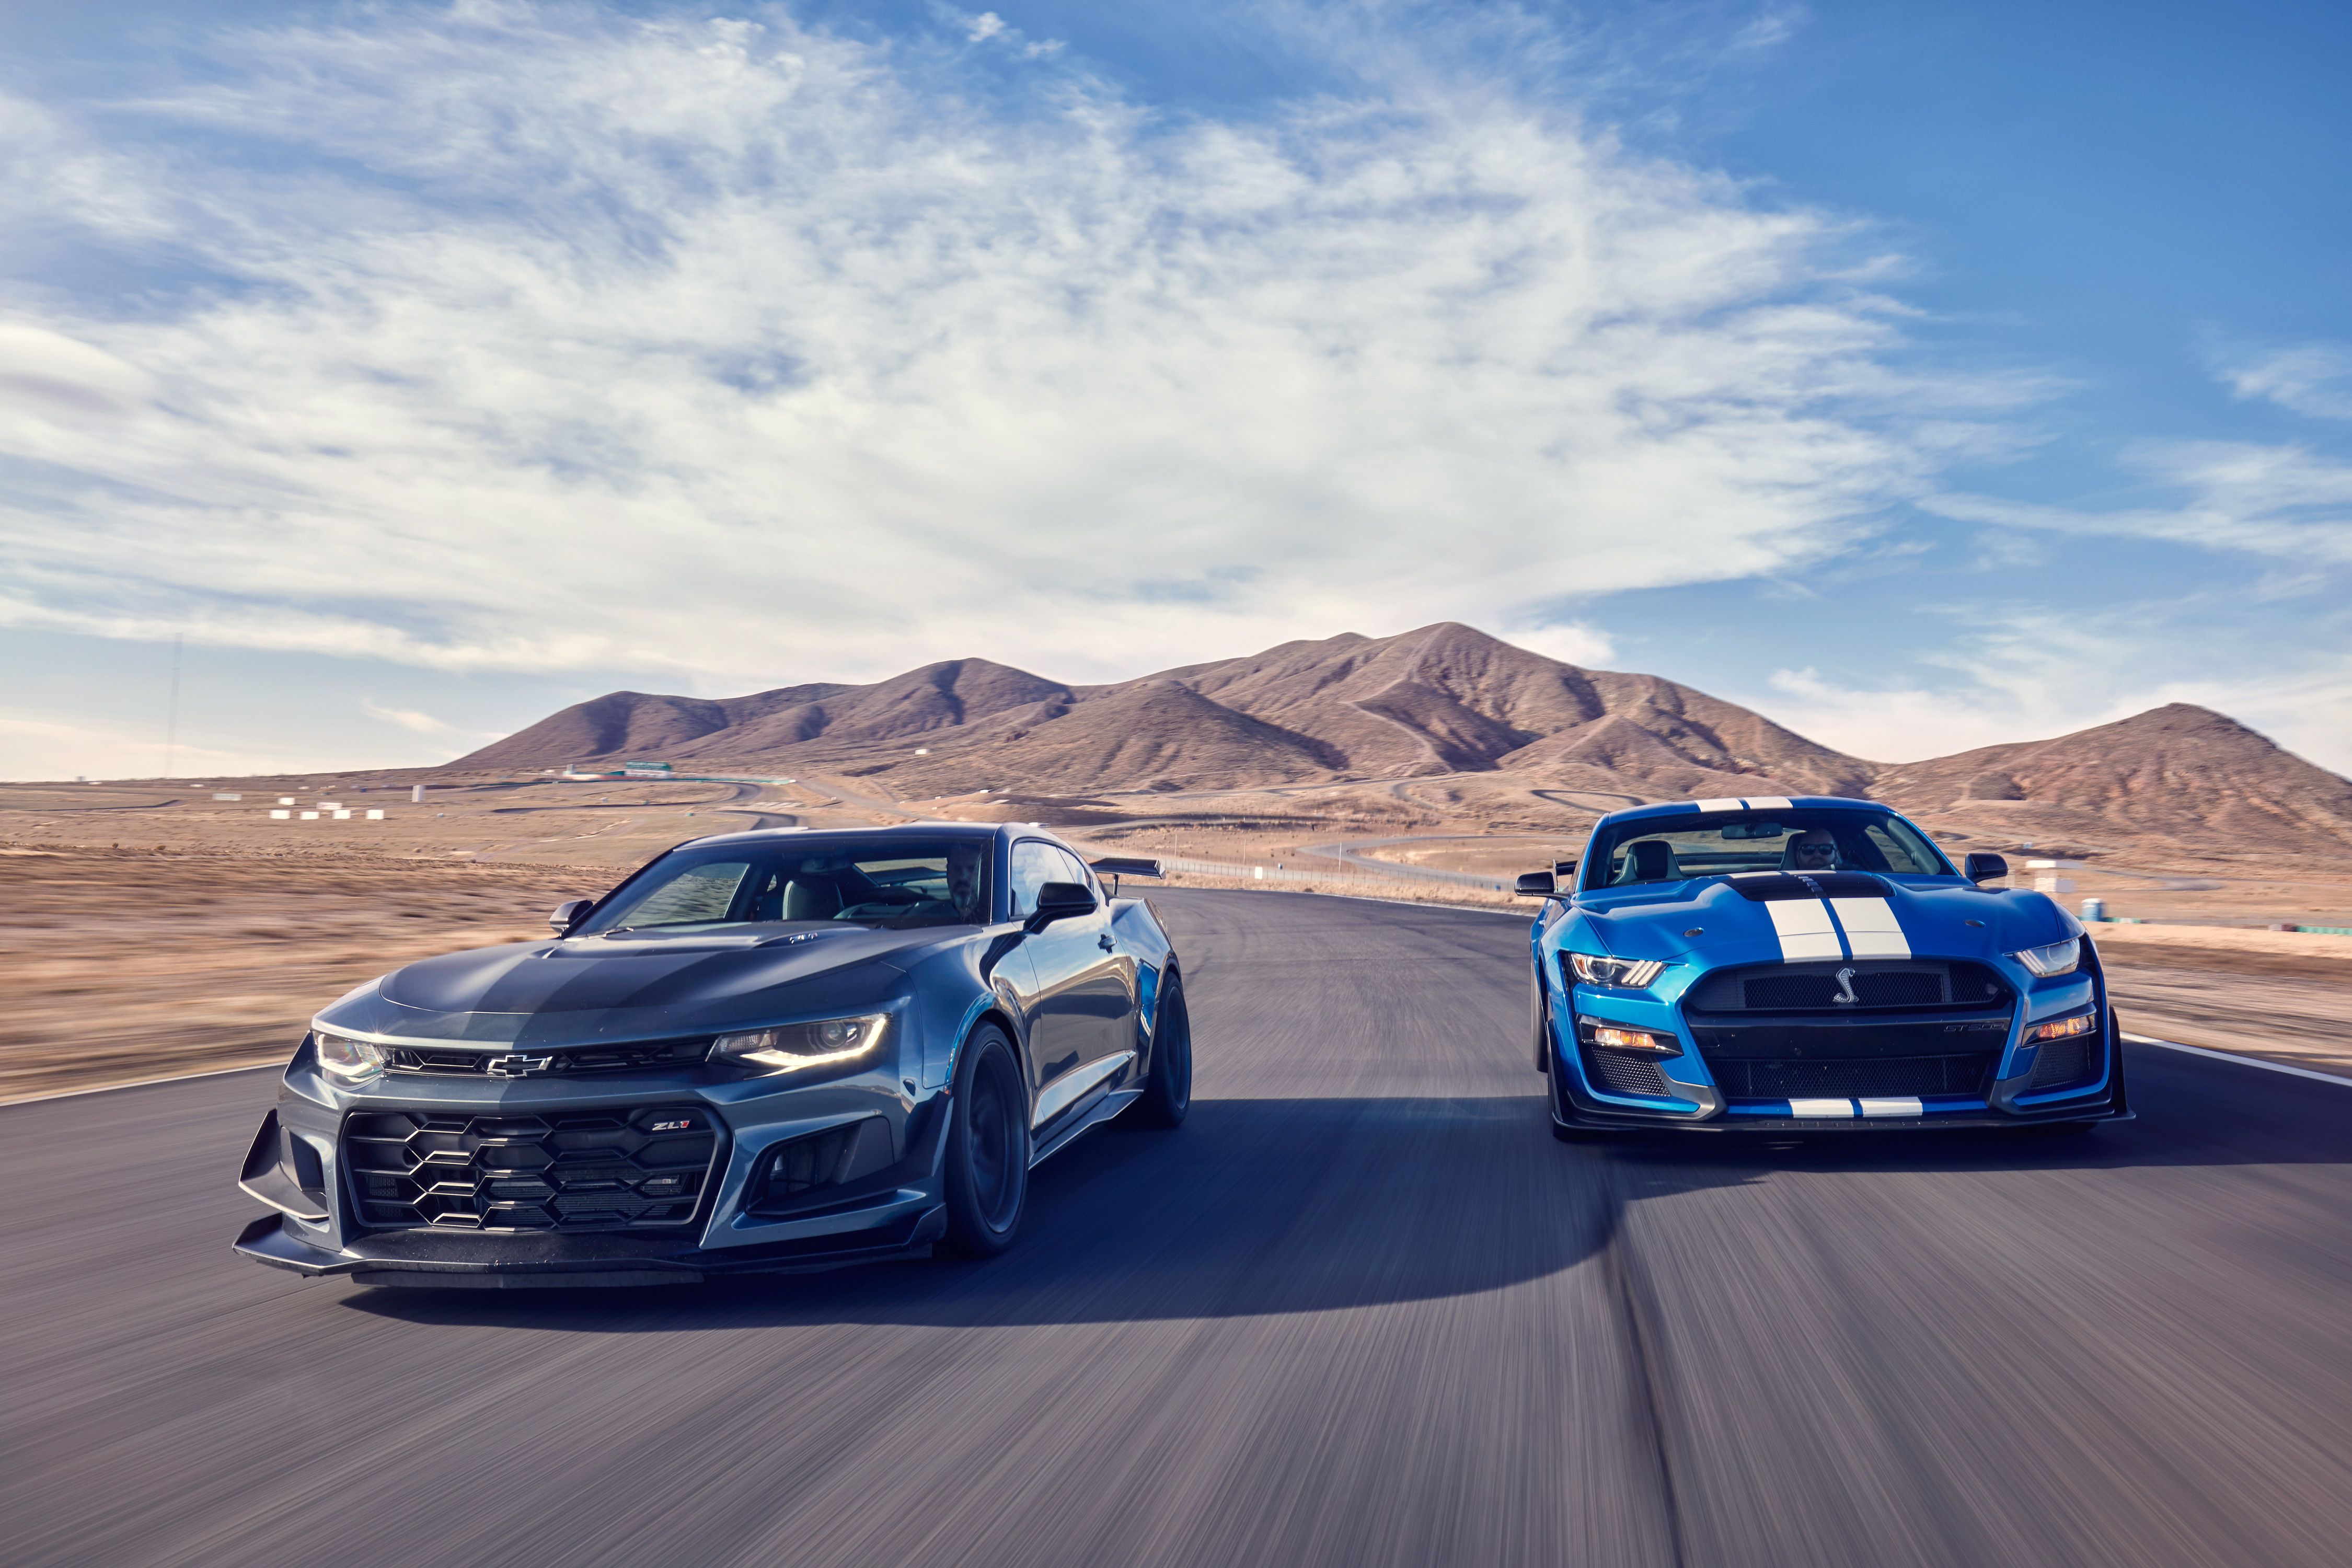 Betting on the Ponies: Mustang Shelby GT500 vs Camaro ZL1 1LE